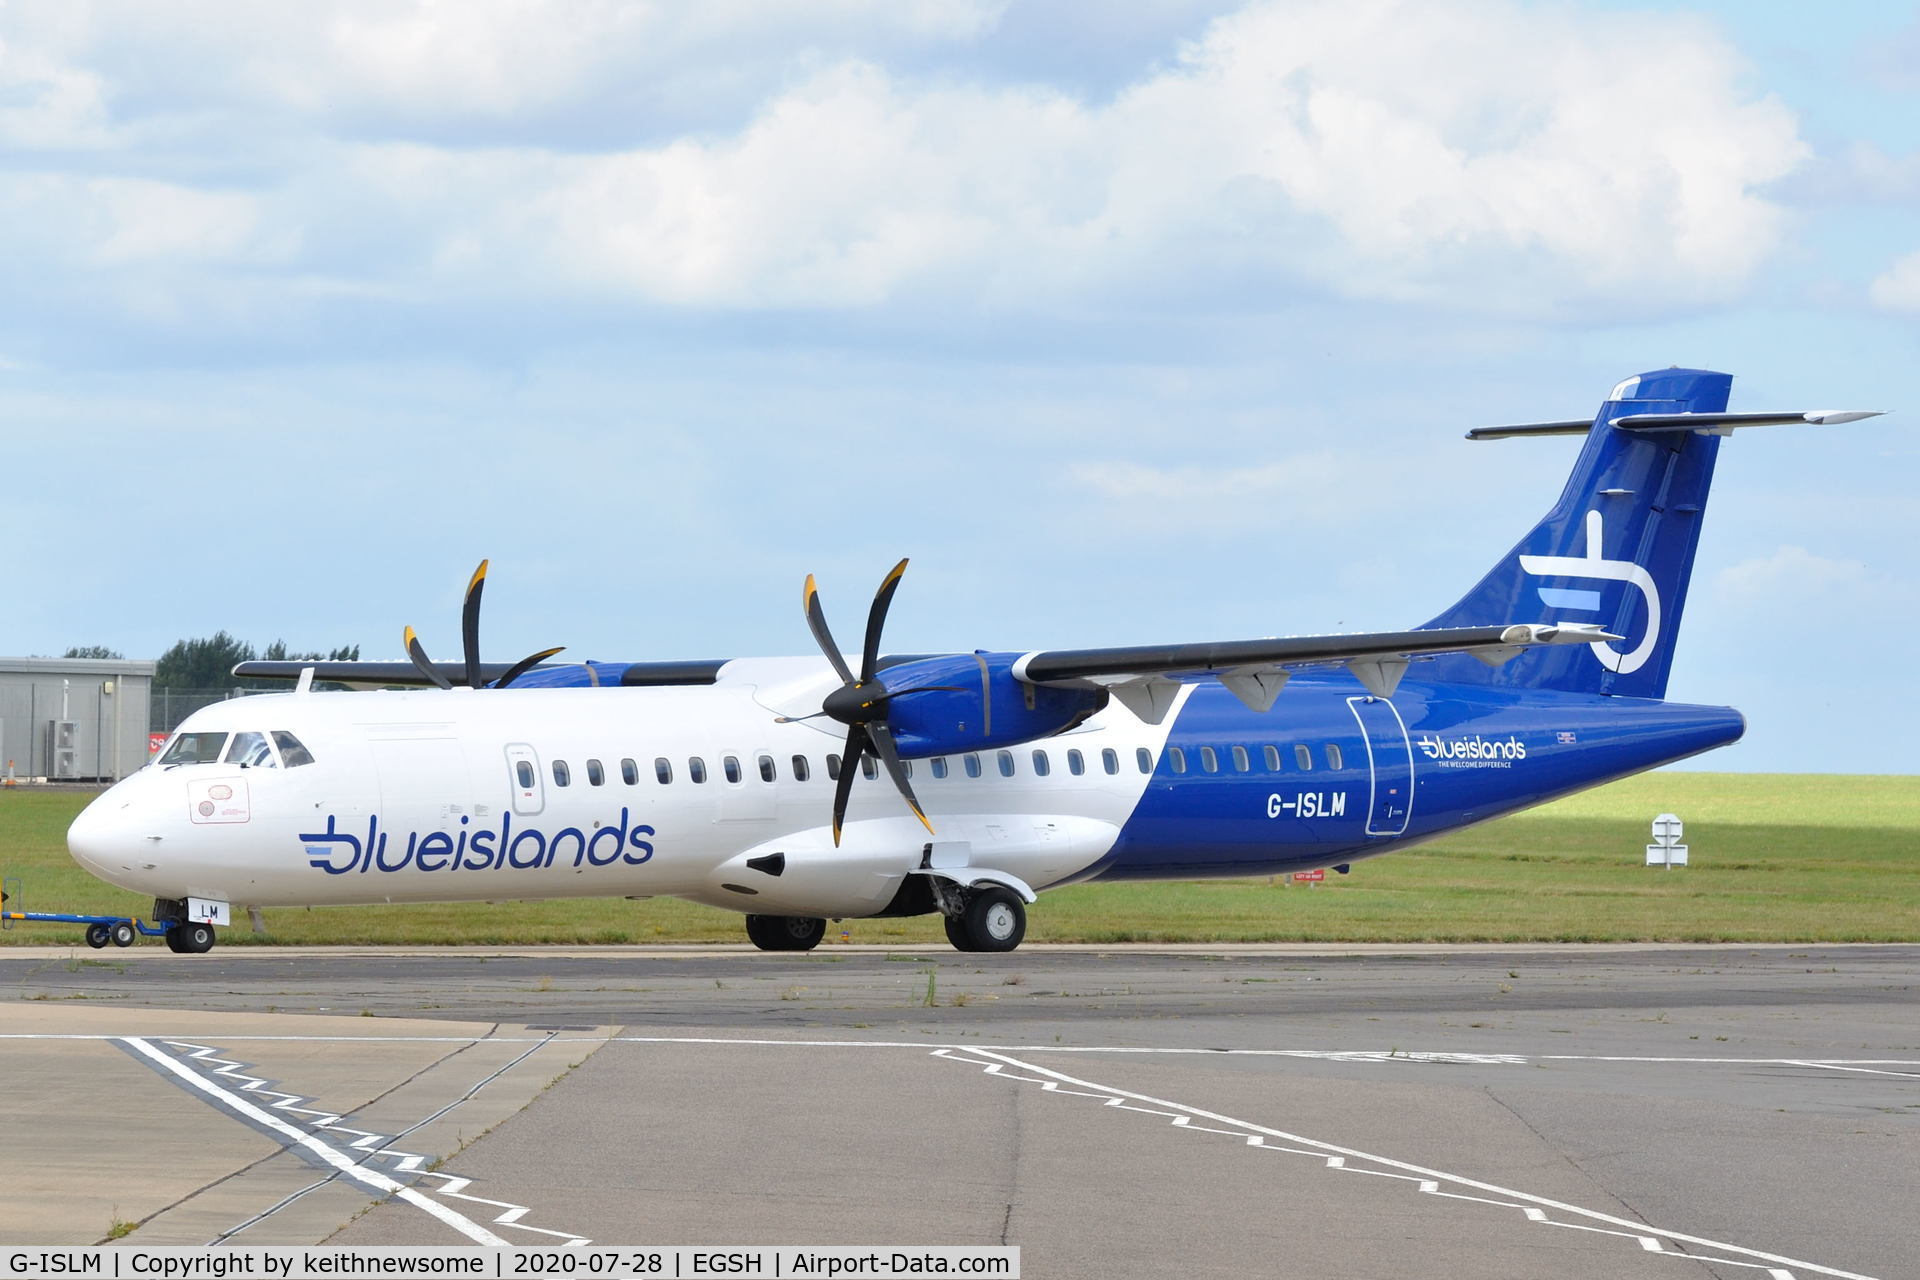 G-ISLM, 2007 ATR 72-212A C/N 762, Towed from spray shop with later colour scheme.